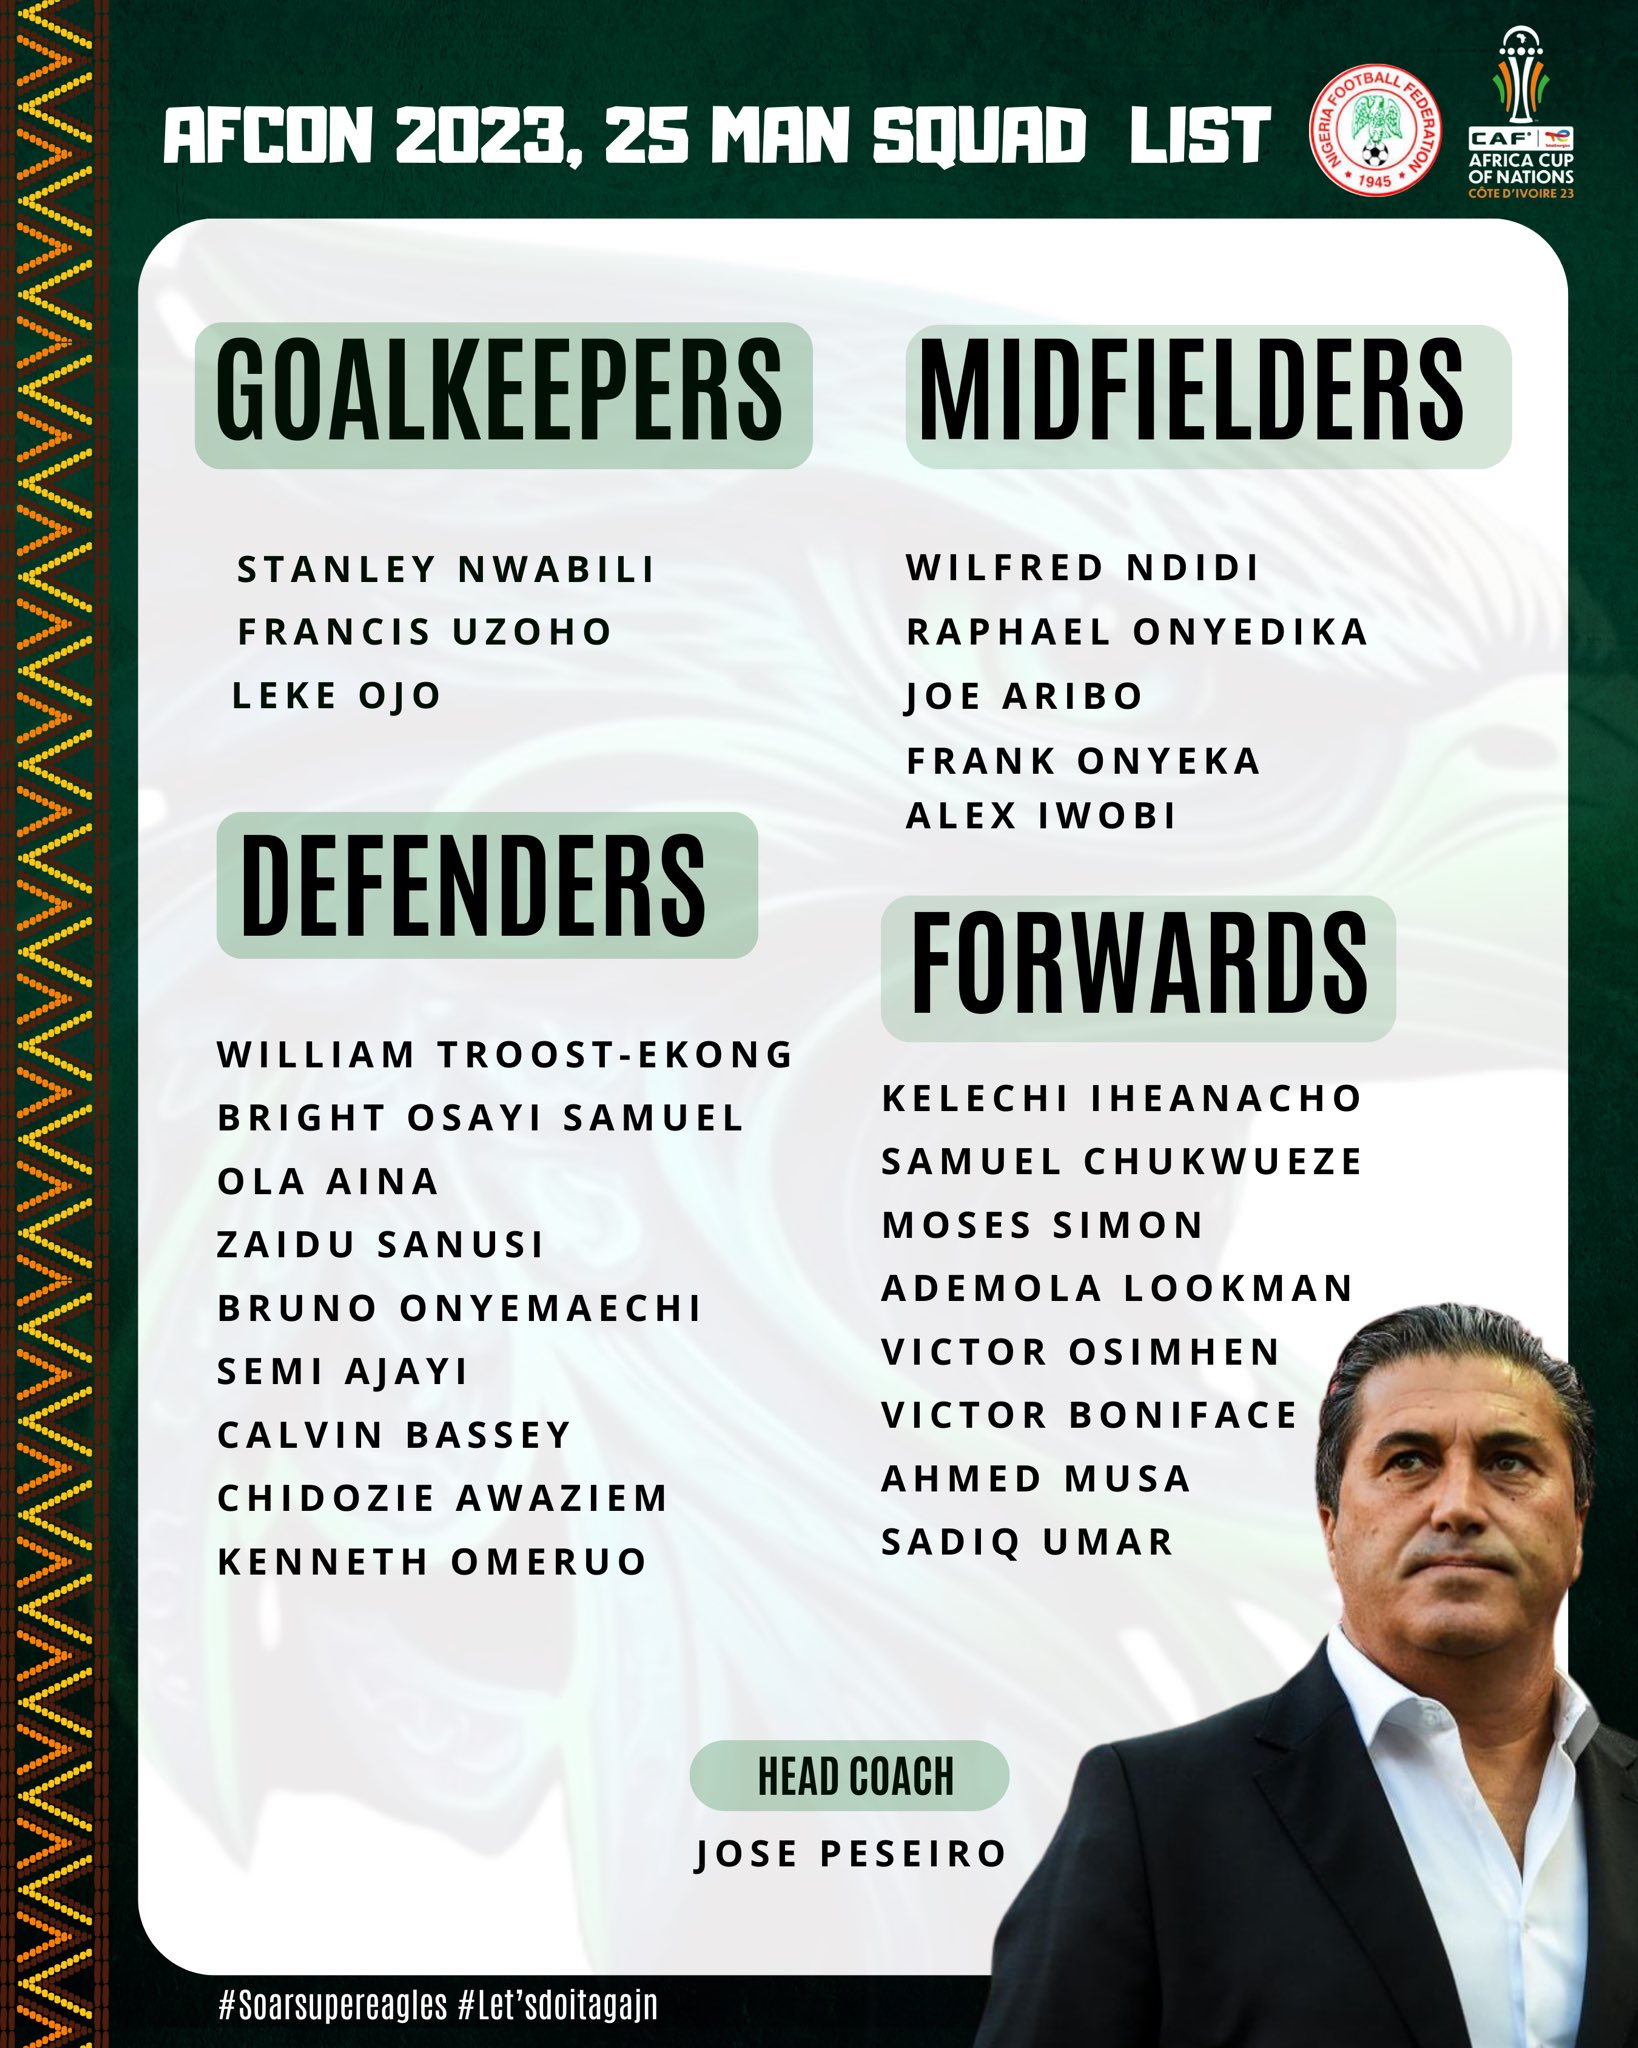 BREAKING: AFCON 2023: Jose Peseiro releases 25-man squad [FULL LIST]